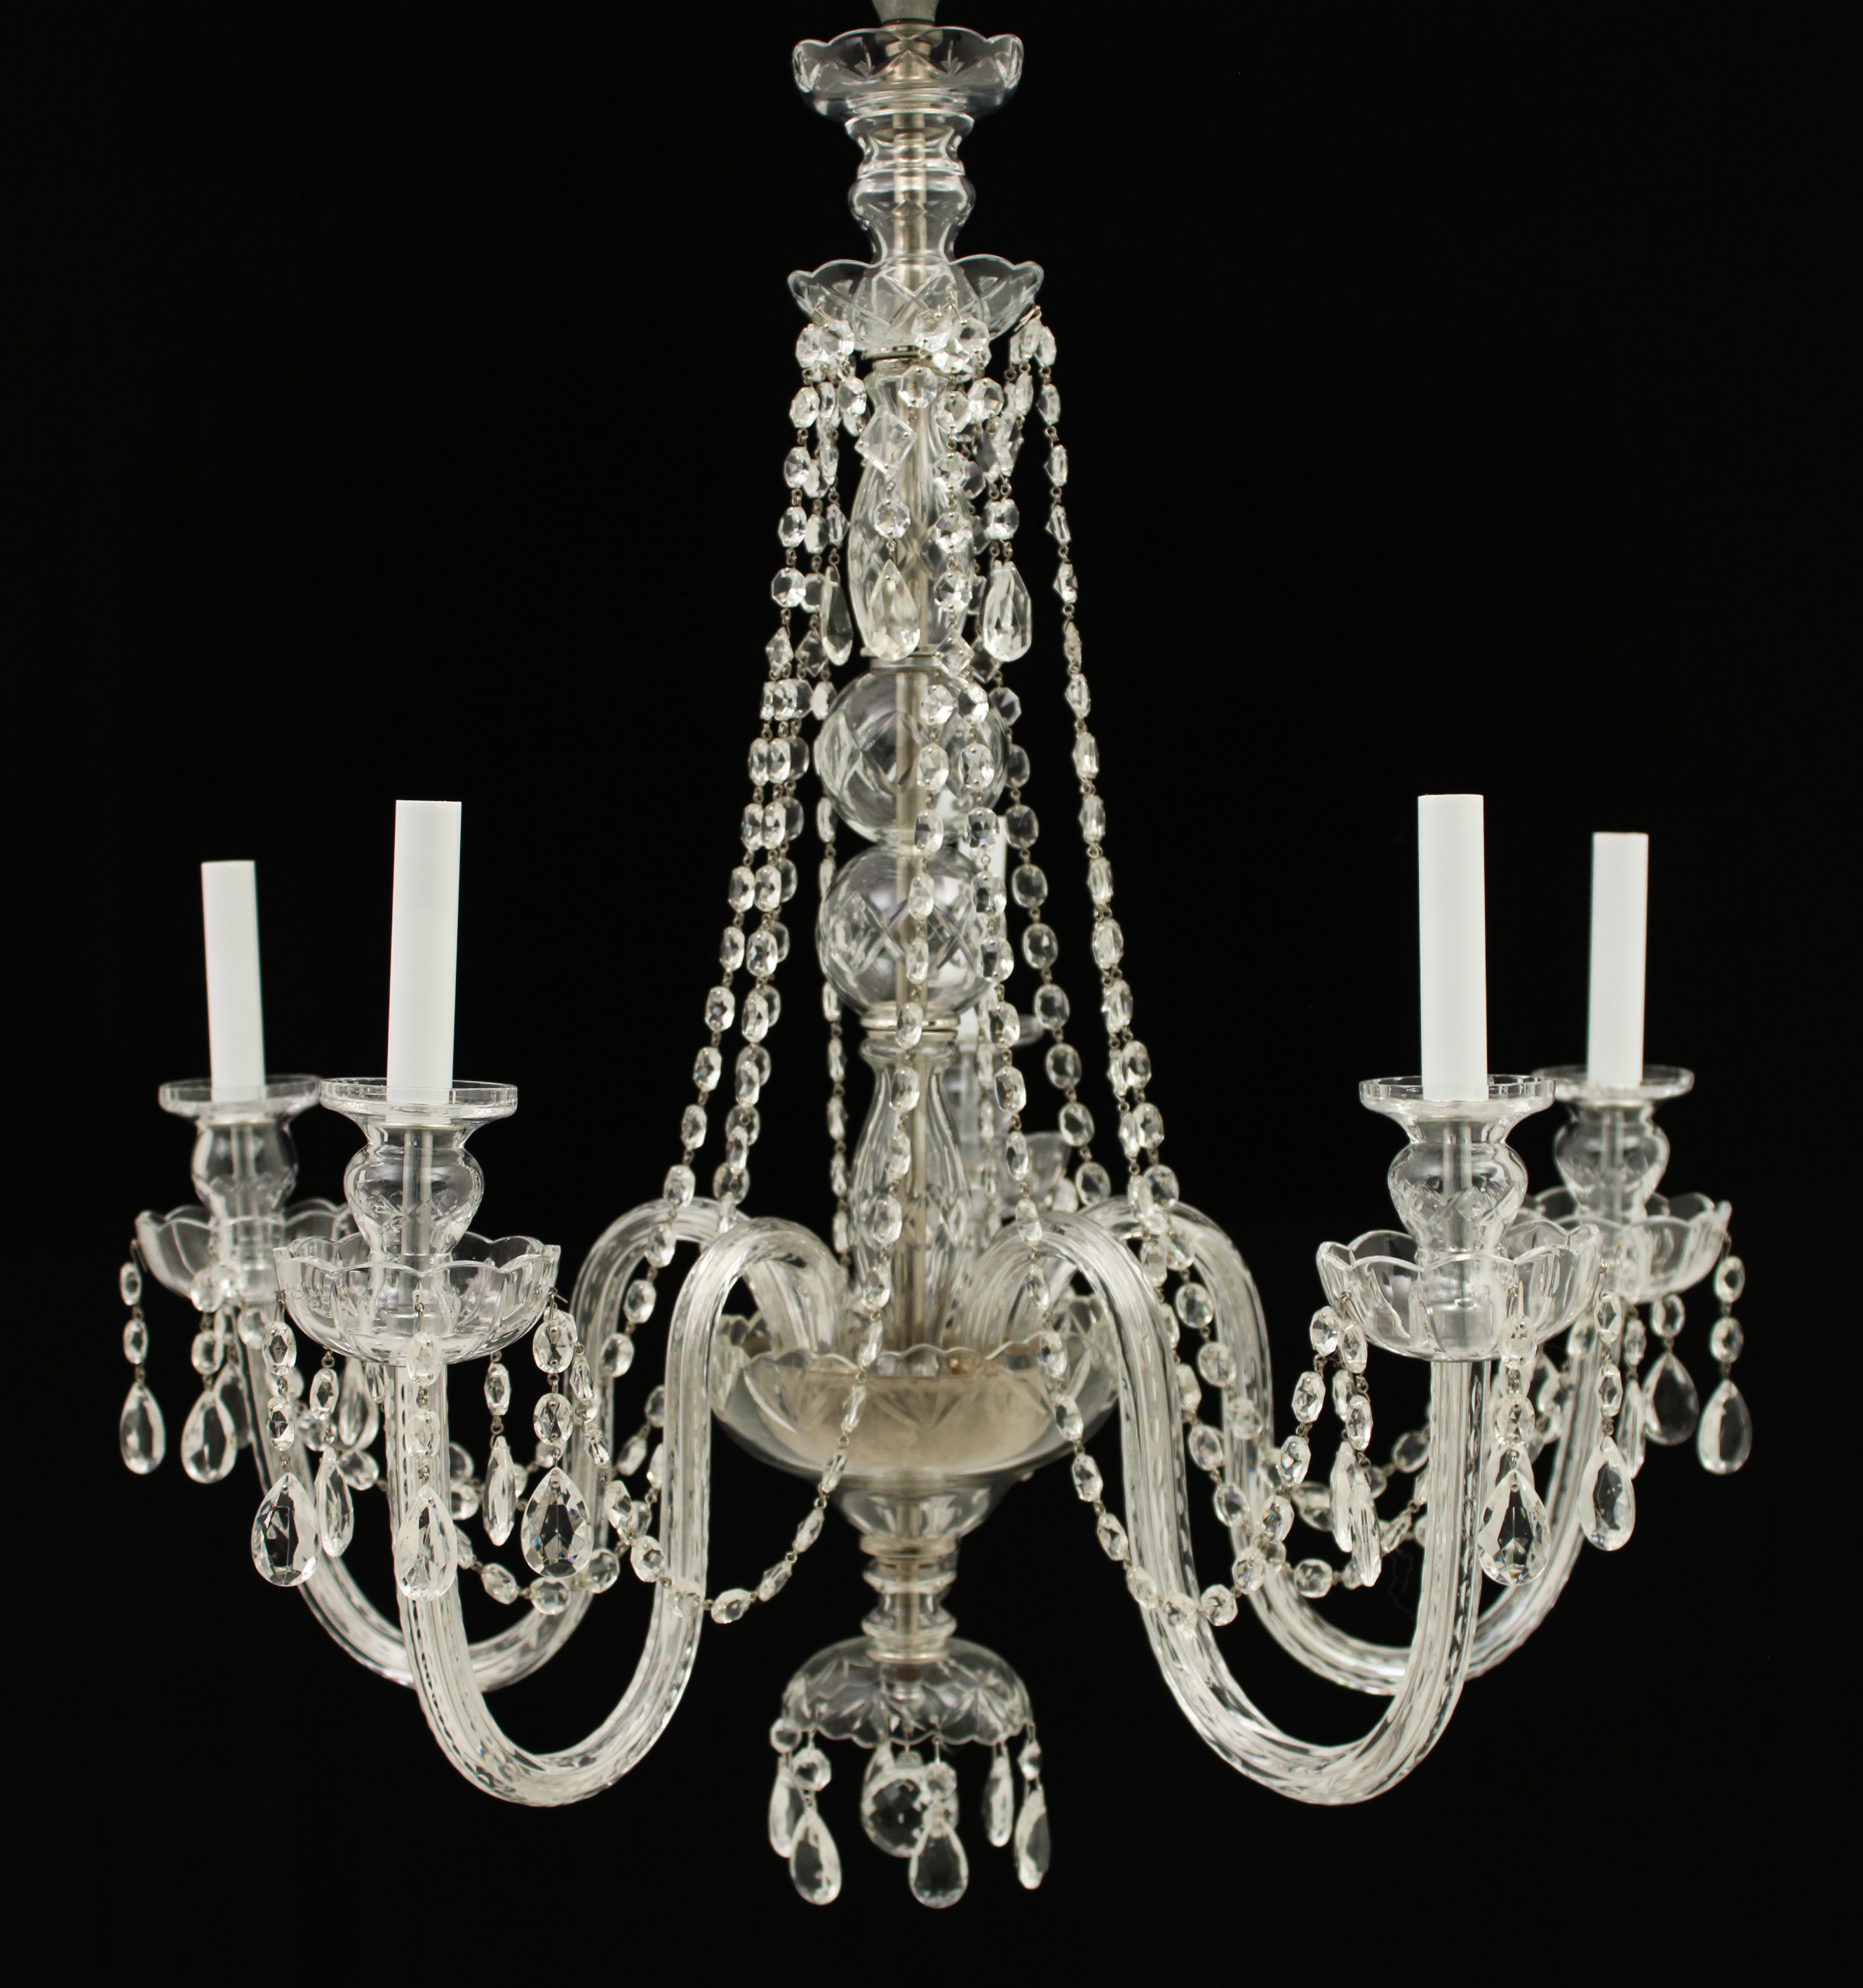 WATERFORD STYLE 5 LIGHT CRYSTAL 2c89c7